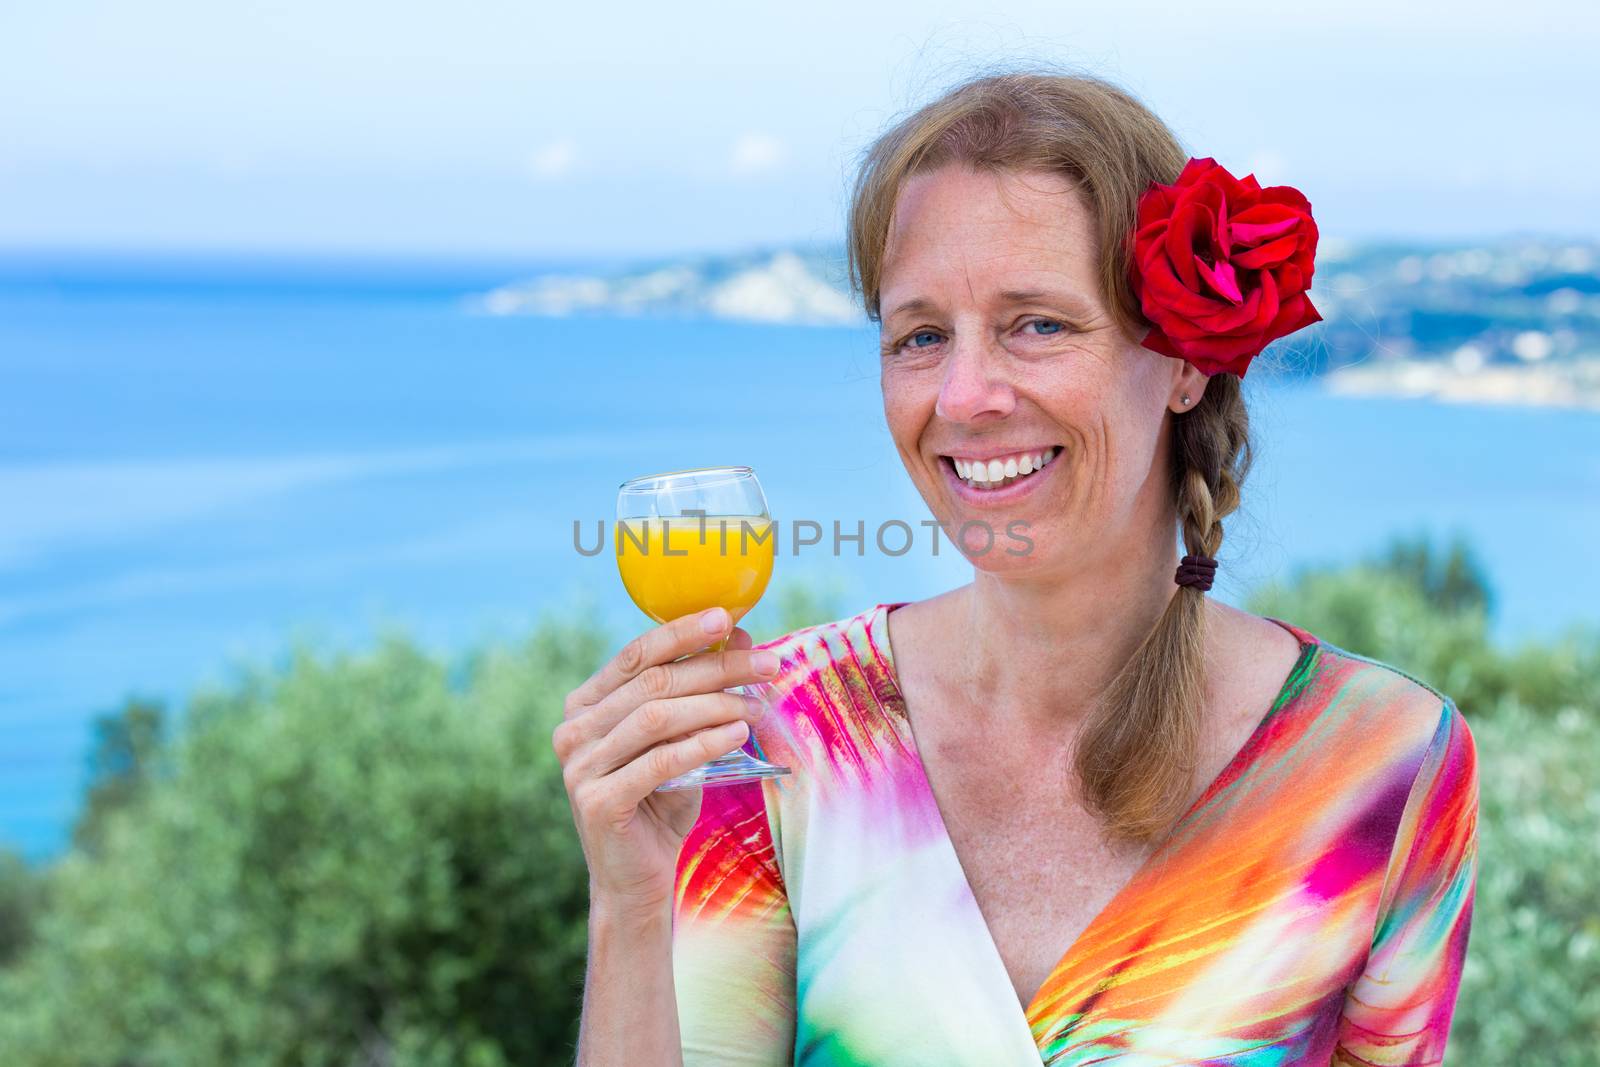 Dutch woman with drink and red rose near sea by BenSchonewille